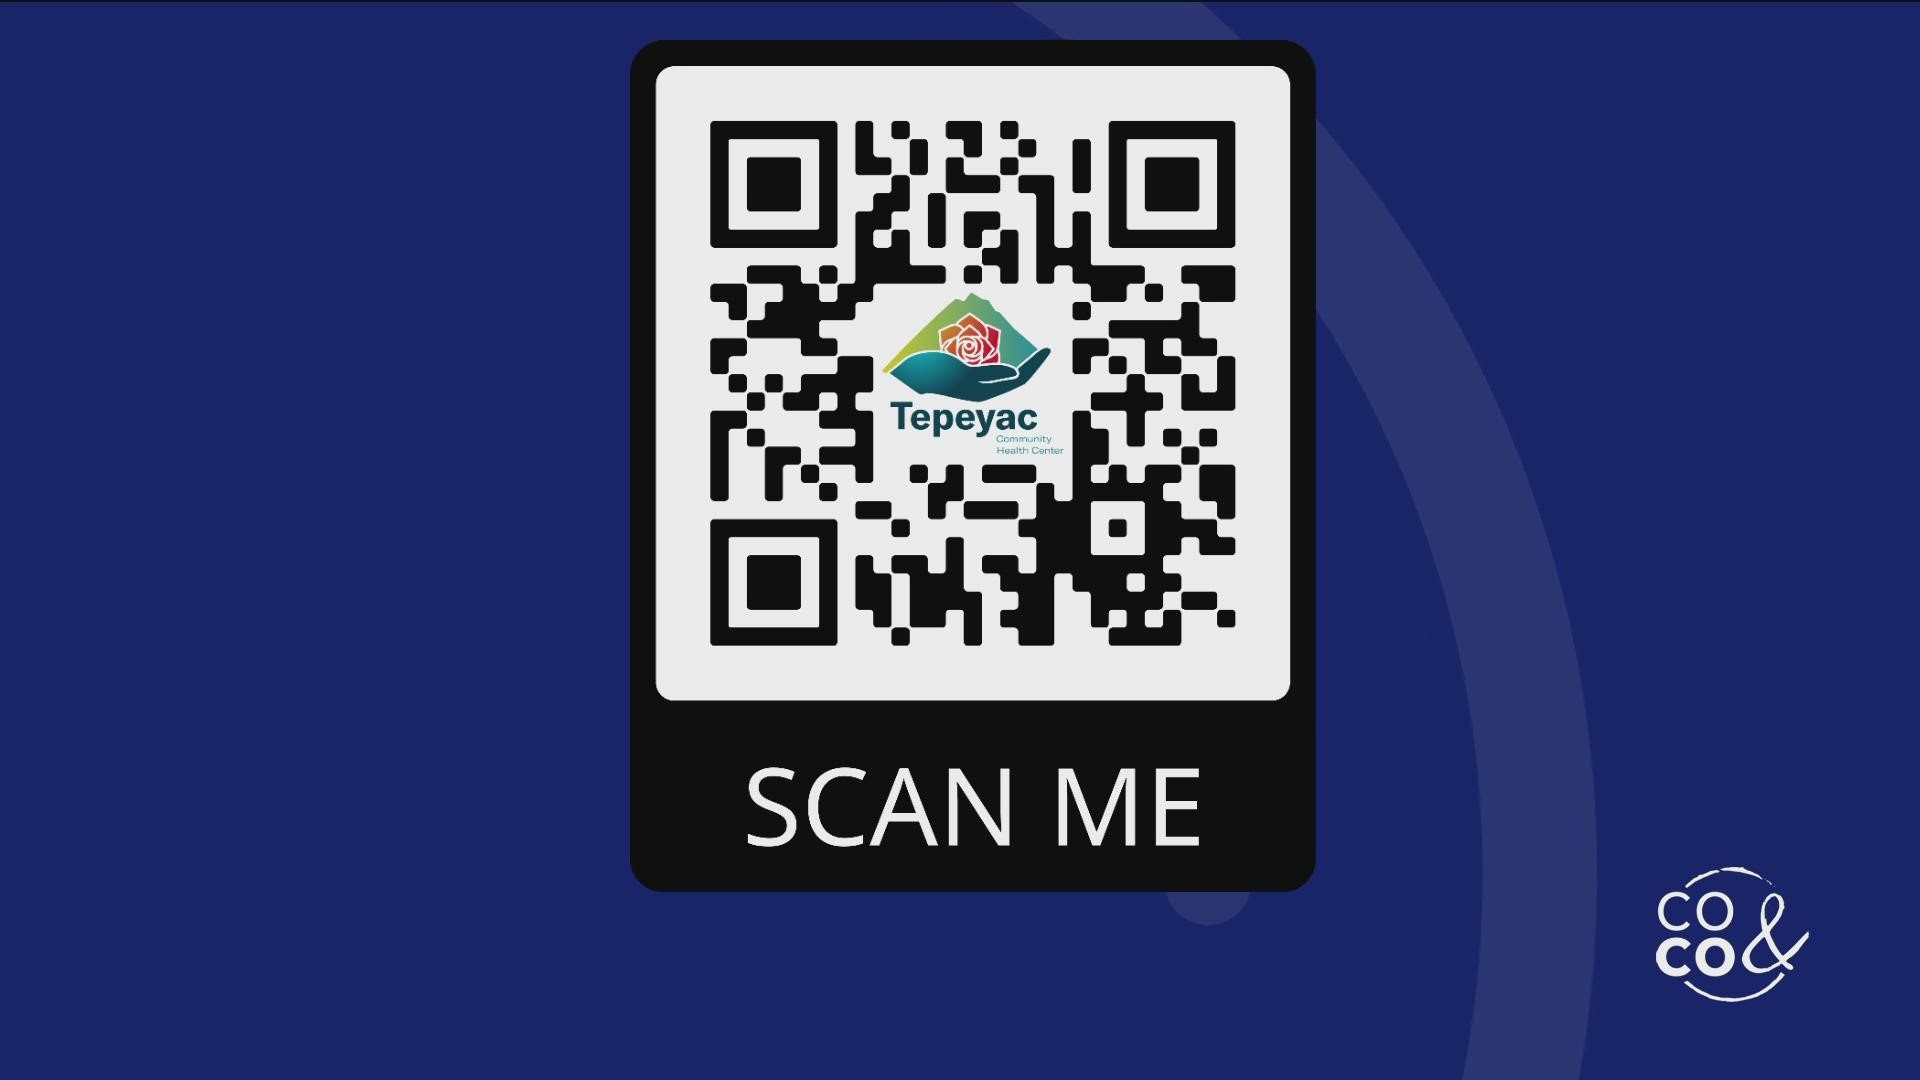 Scan the QR code to learn more, find a provider and be connected to resources that can help you. Visit TepeyacHealth.org or call 303.458.5302 to get started.